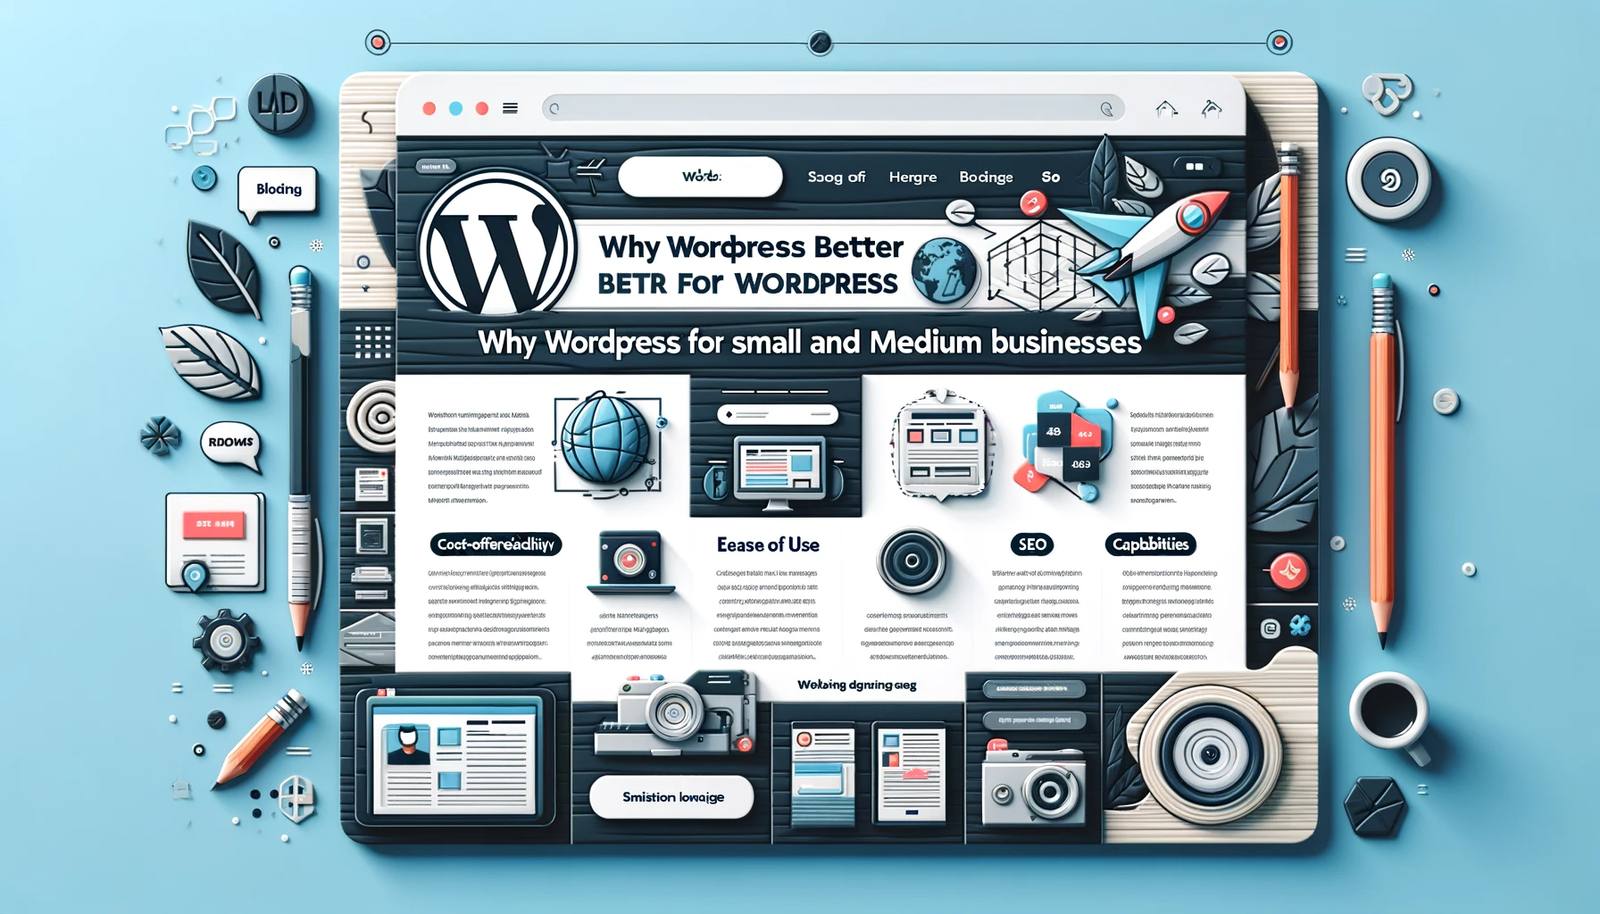 Why WordPress is Better for Small and Medium Businesses